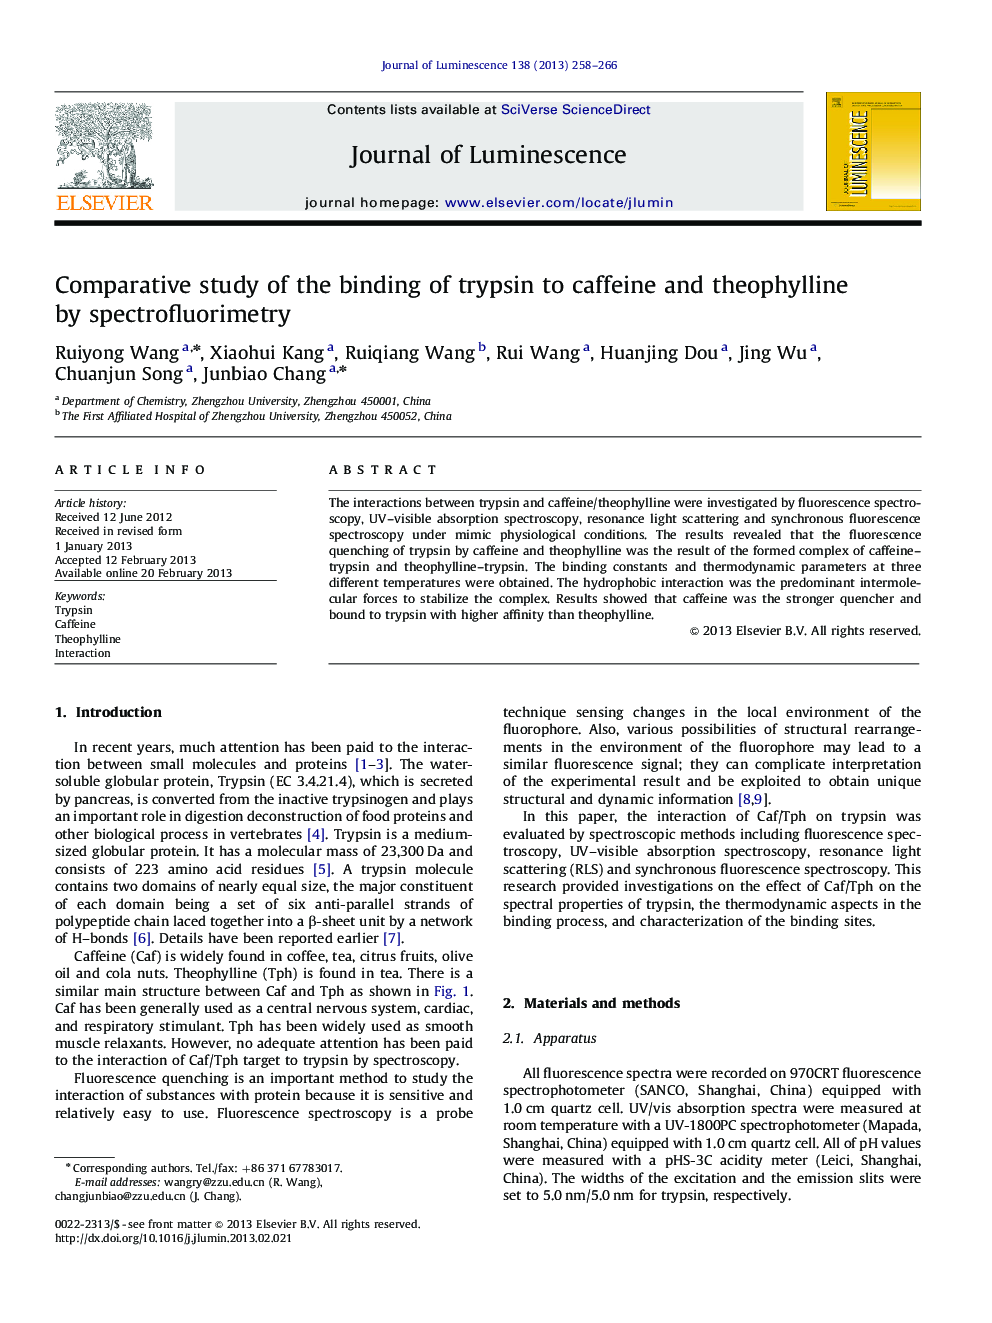 Comparative study of the binding of trypsin to caffeine and theophylline by spectrofluorimetry